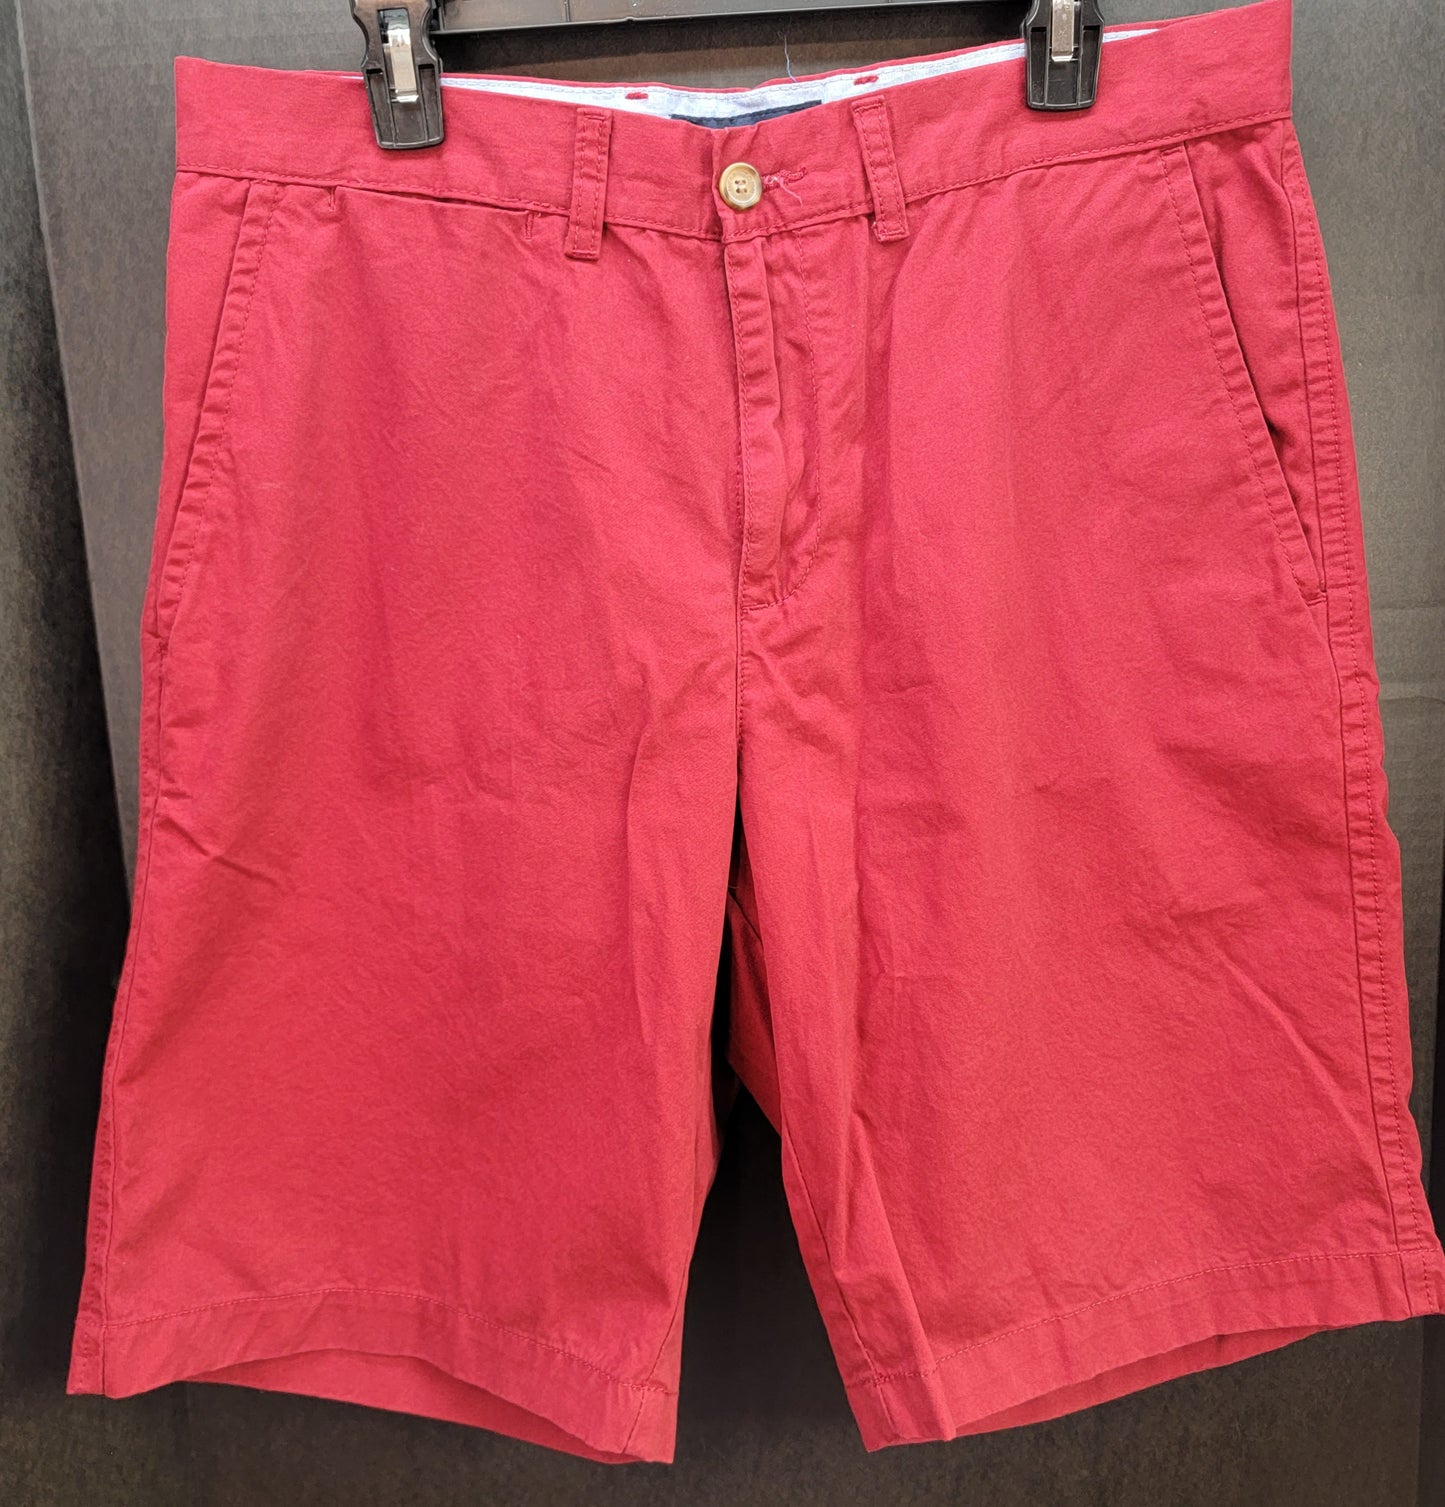 Tommy Hilfiger Men's Barn Red Shorts Size 34W Retail $39.98